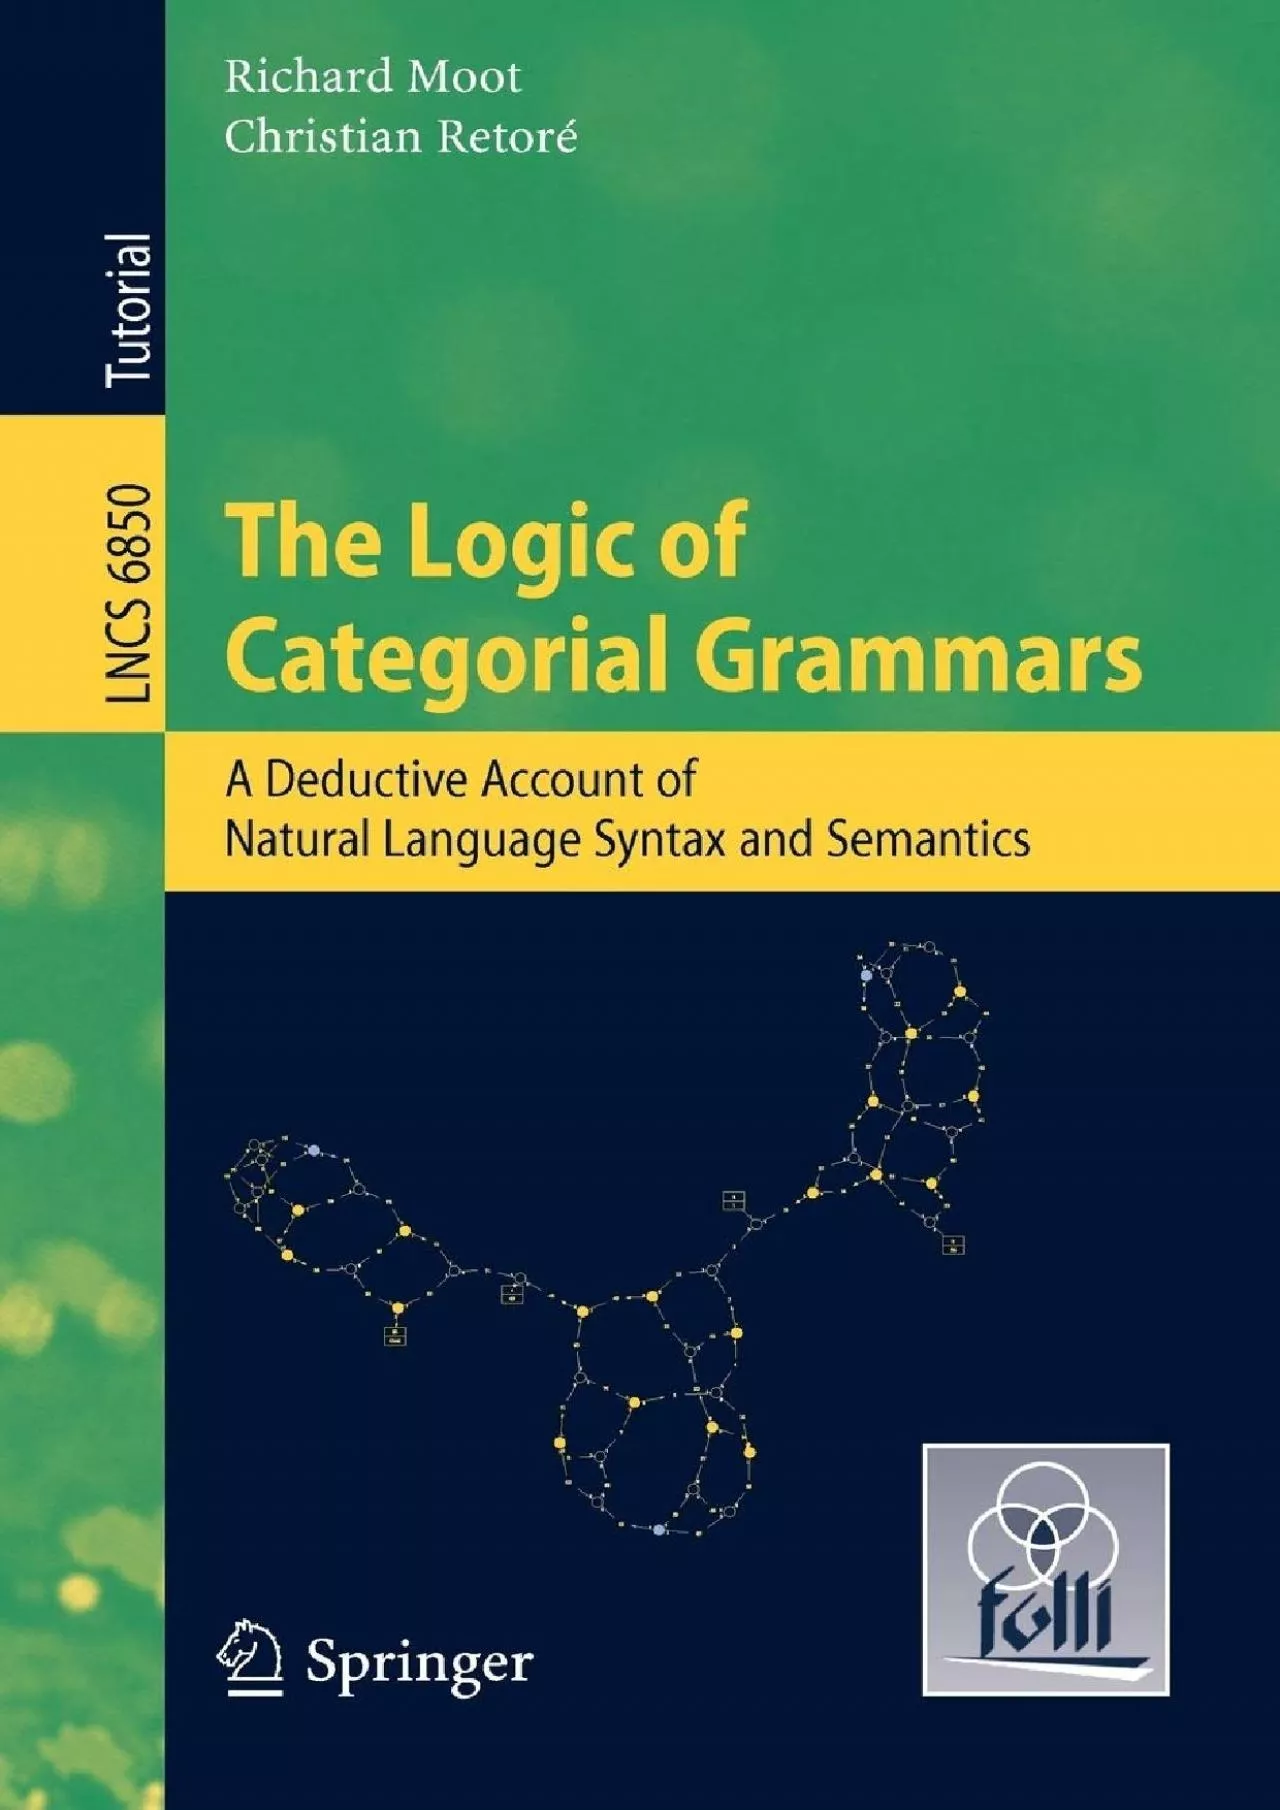 [eBOOK]-The Logic of Categorial Grammars: A deductive account of natural language syntax